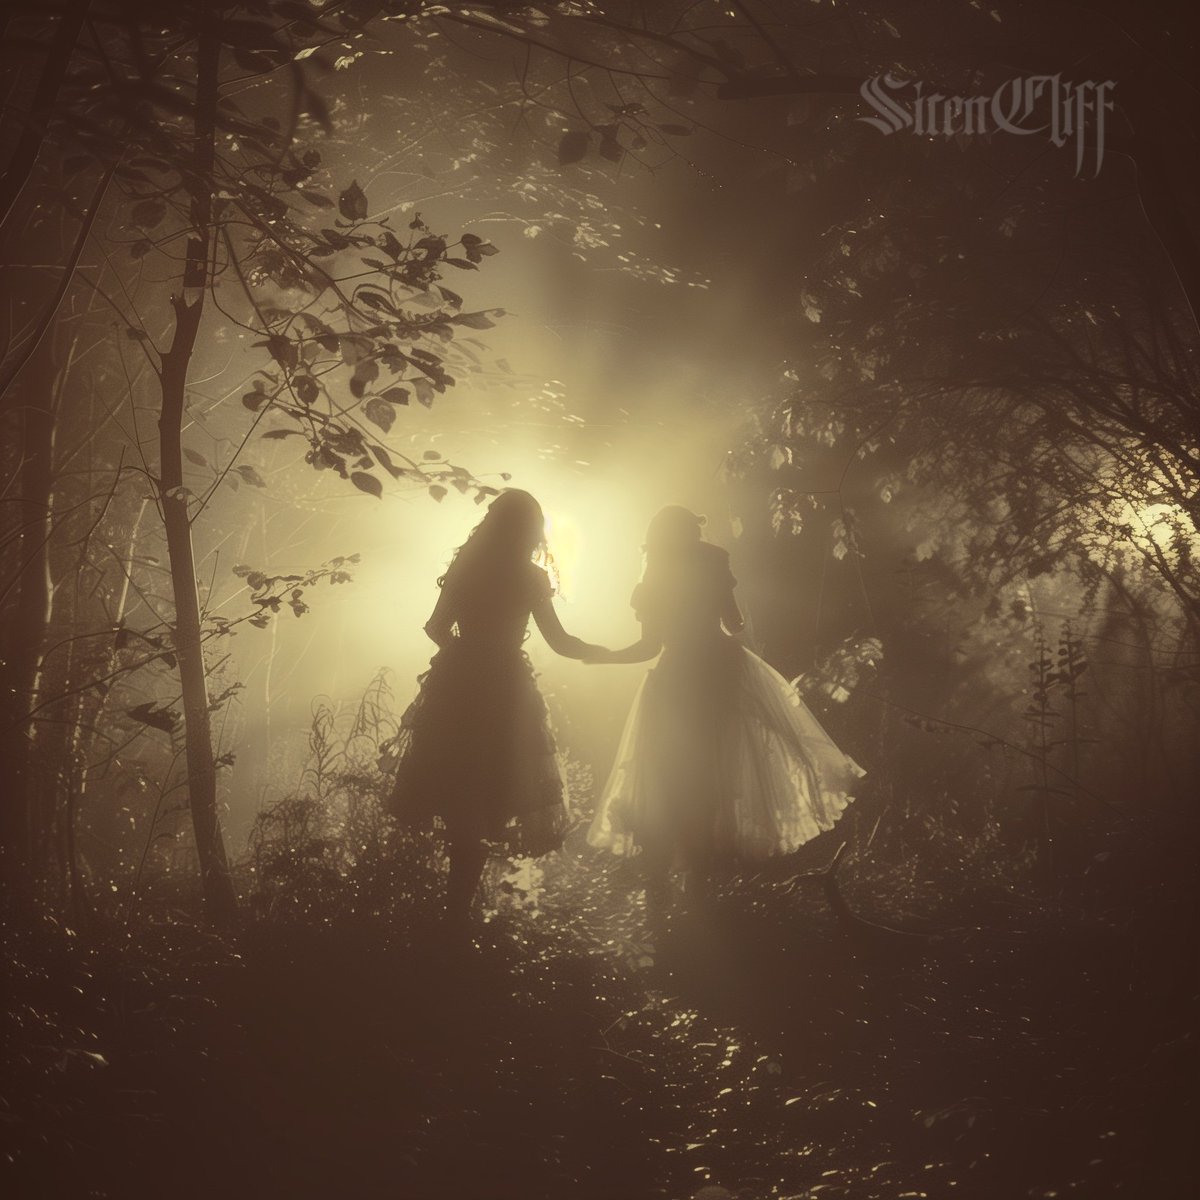 • walk this path with me • 𝔖𝔦𝔯𝔢𝔫ℭ𝔩𝔦𝔣𝔣
.
#oldphotography #darkfantasy #FairyTail #AIArtwork